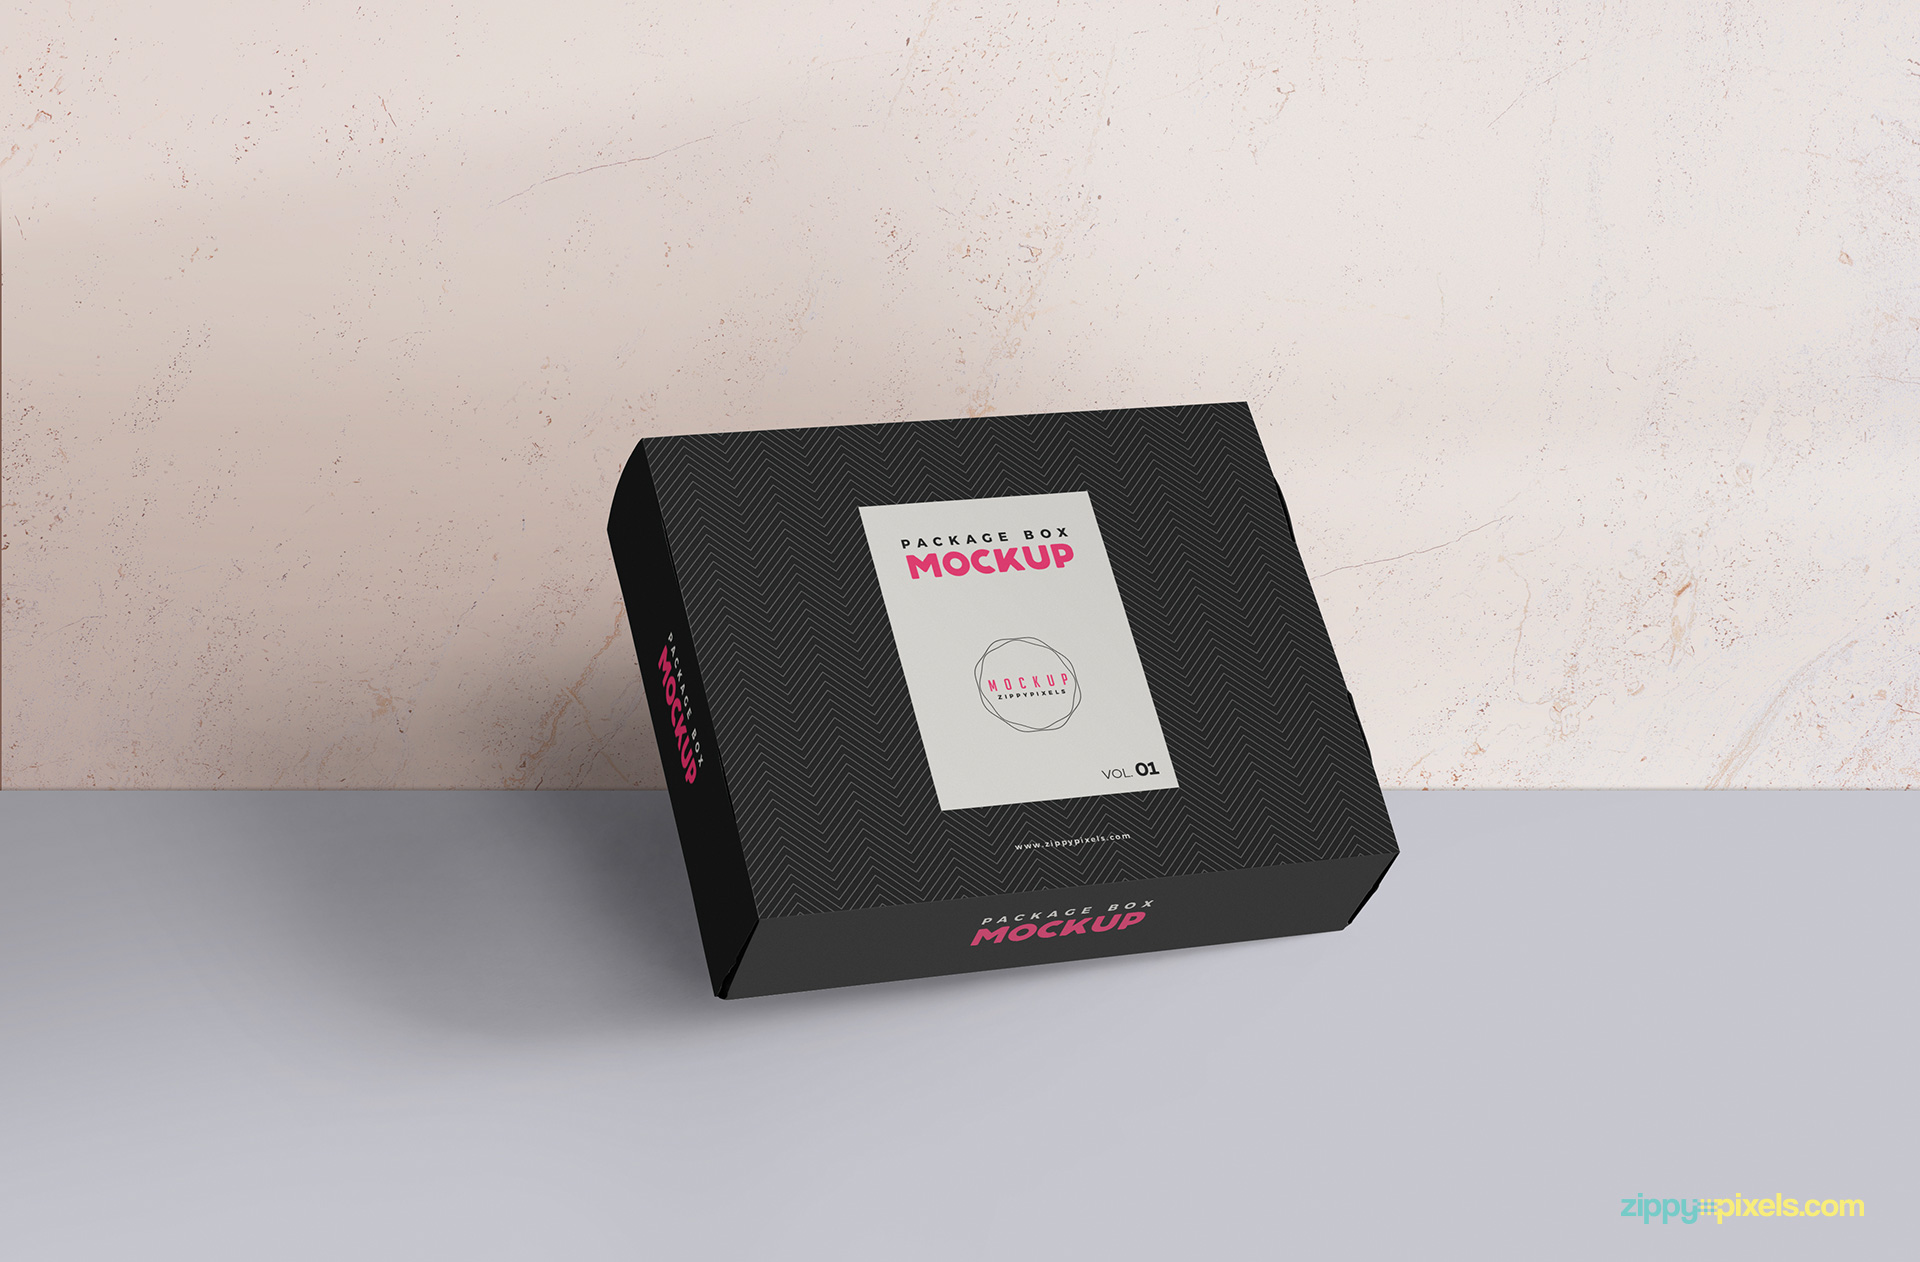 Simply use Adobe Photoshop to change the background of this free box mockup.